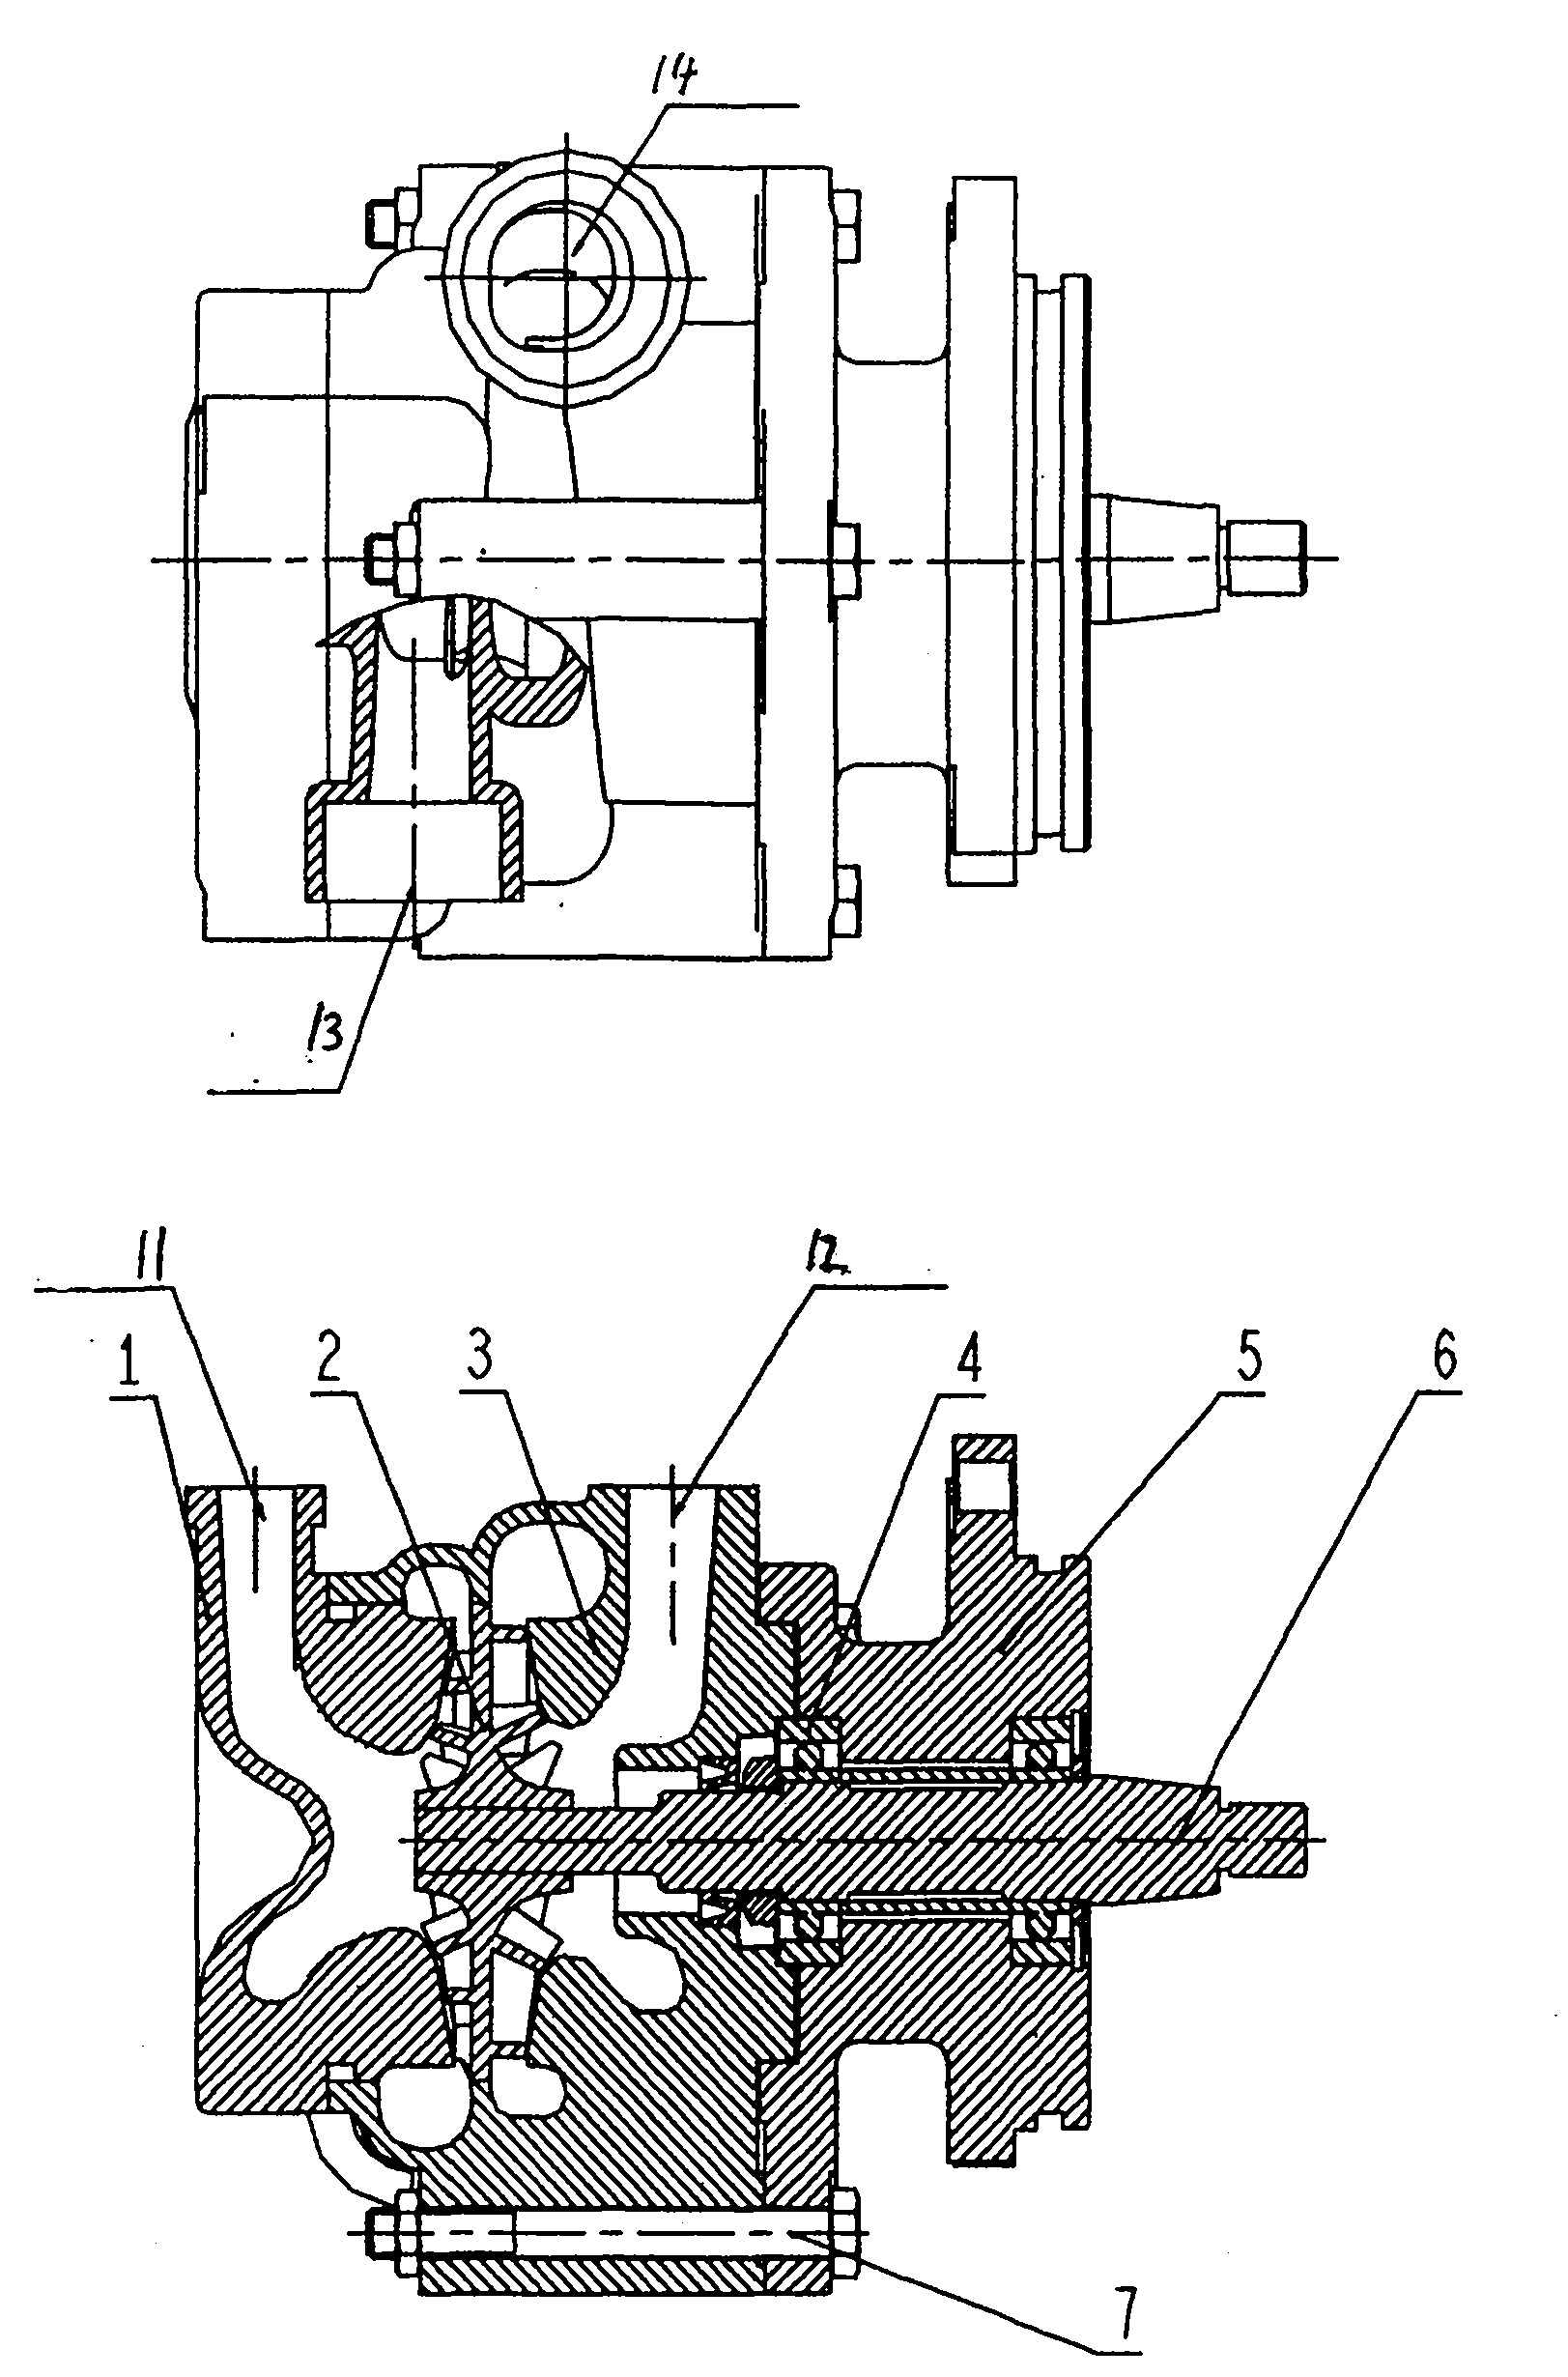 Centrifugal cooling water pump